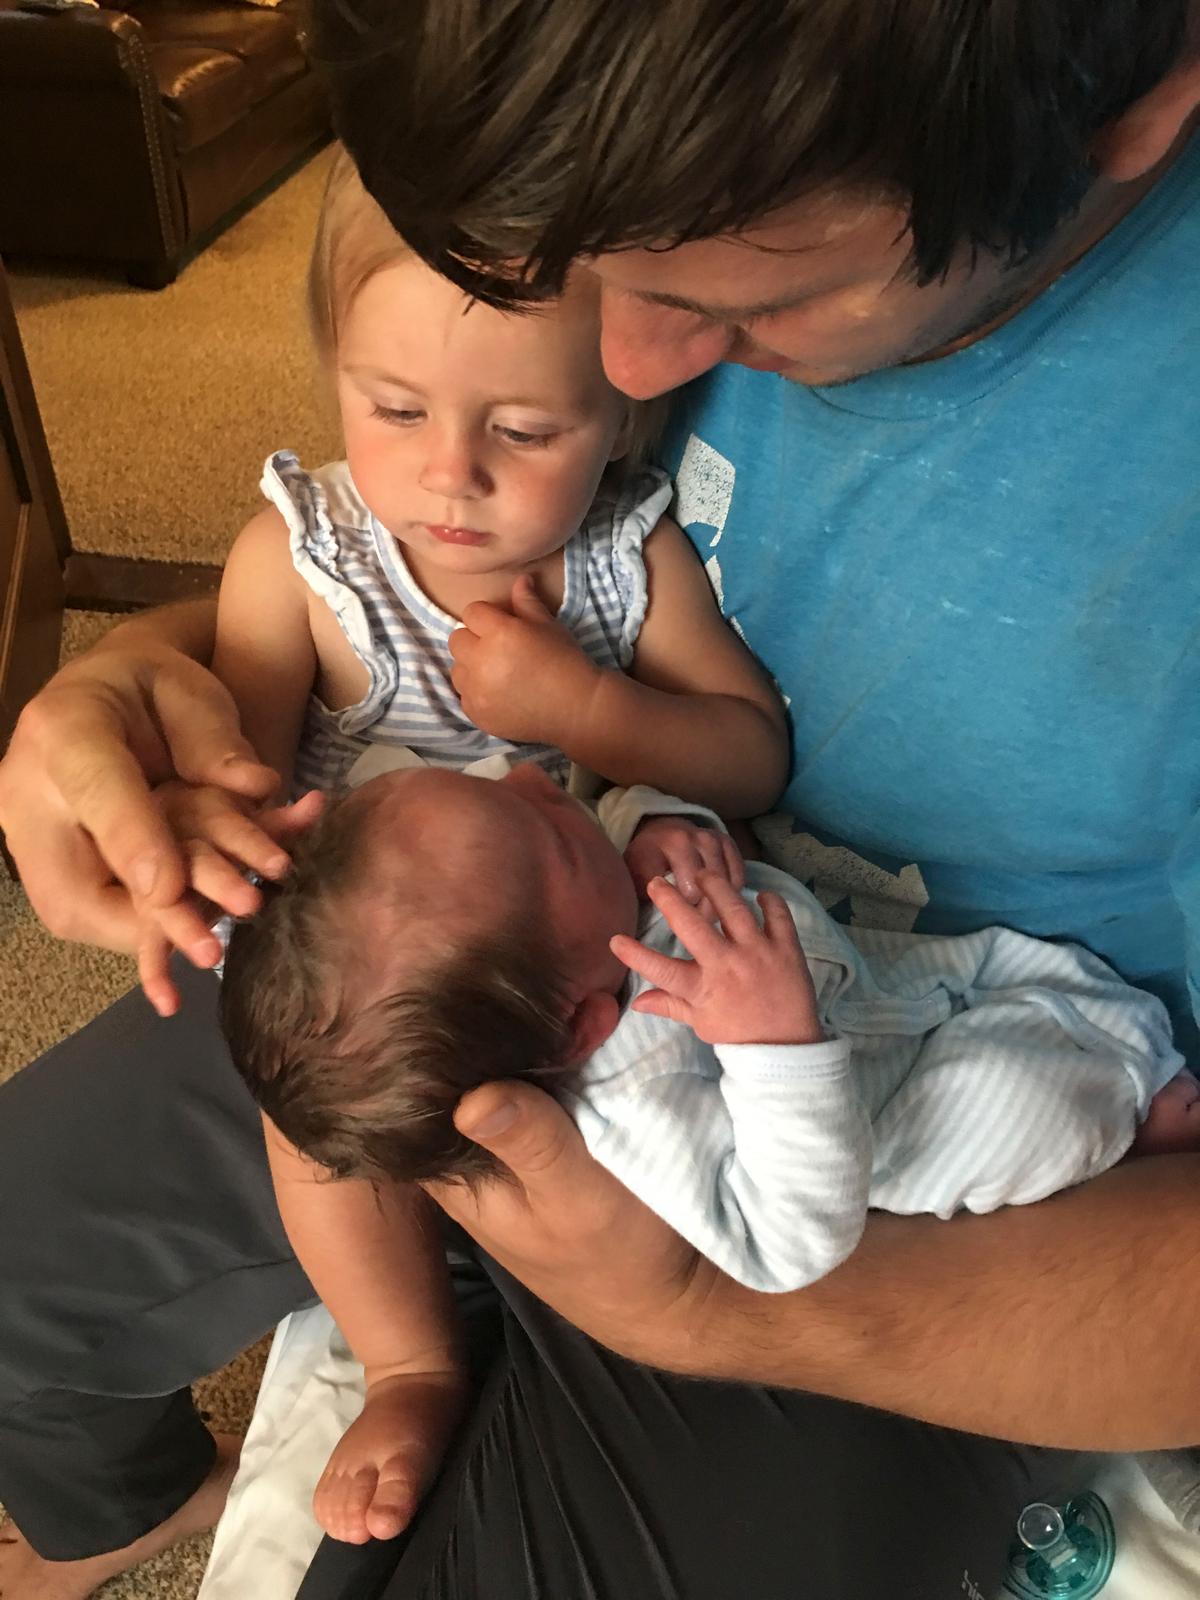 Mr. Shrock introduces Charlette to her baby brother, Charles, on the same day he was born. (Courtesy of Mariah Shrock)